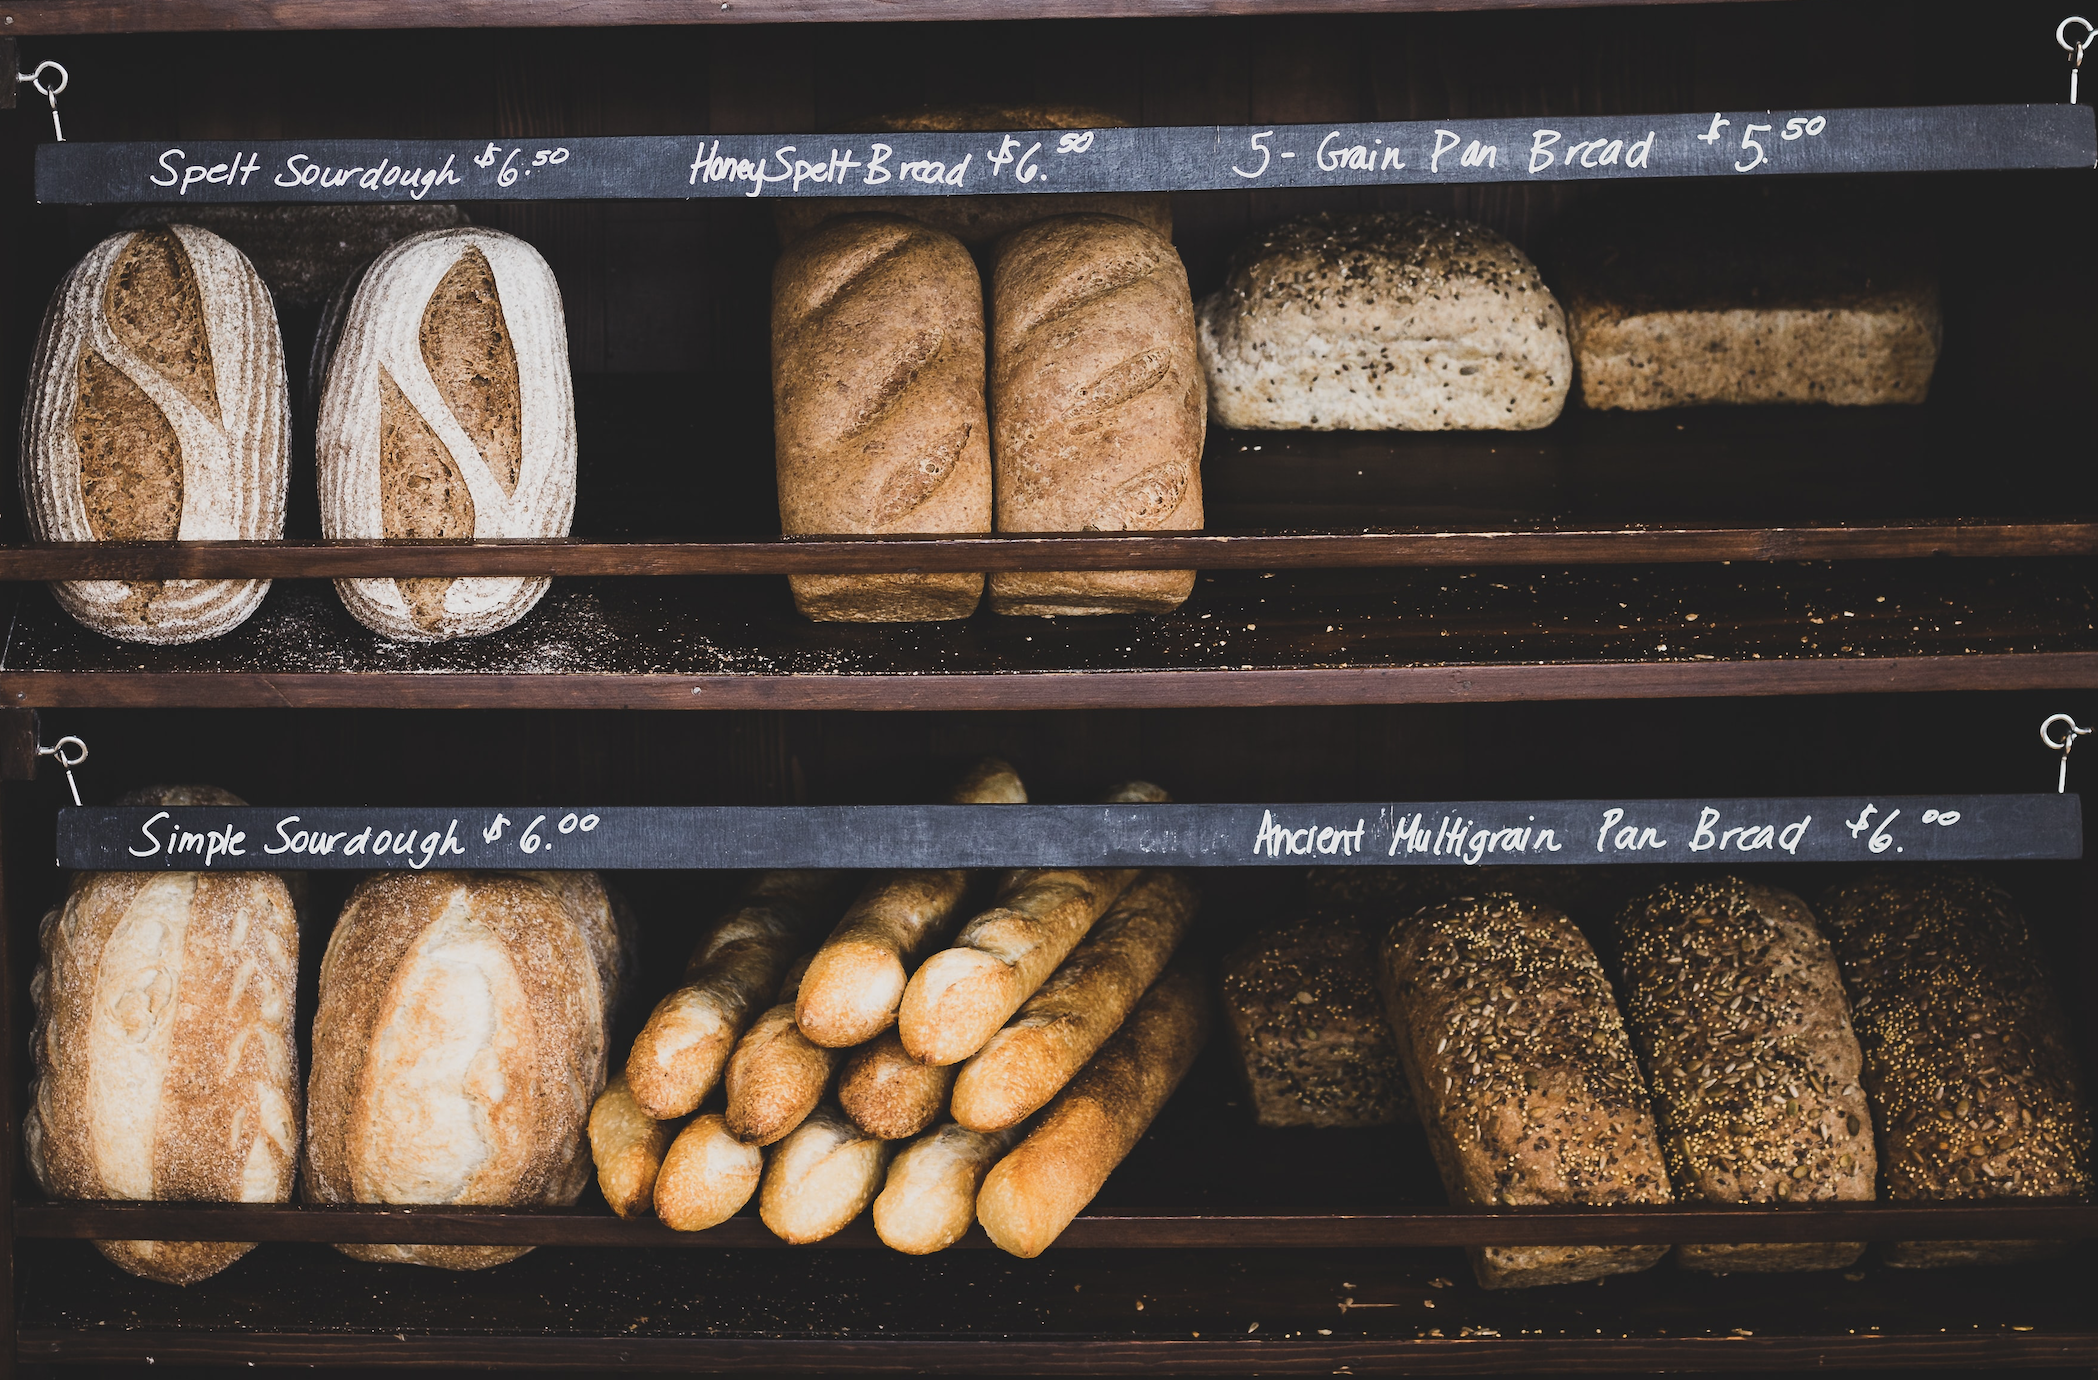 assorted artisan breads displayed on a bakery shelf